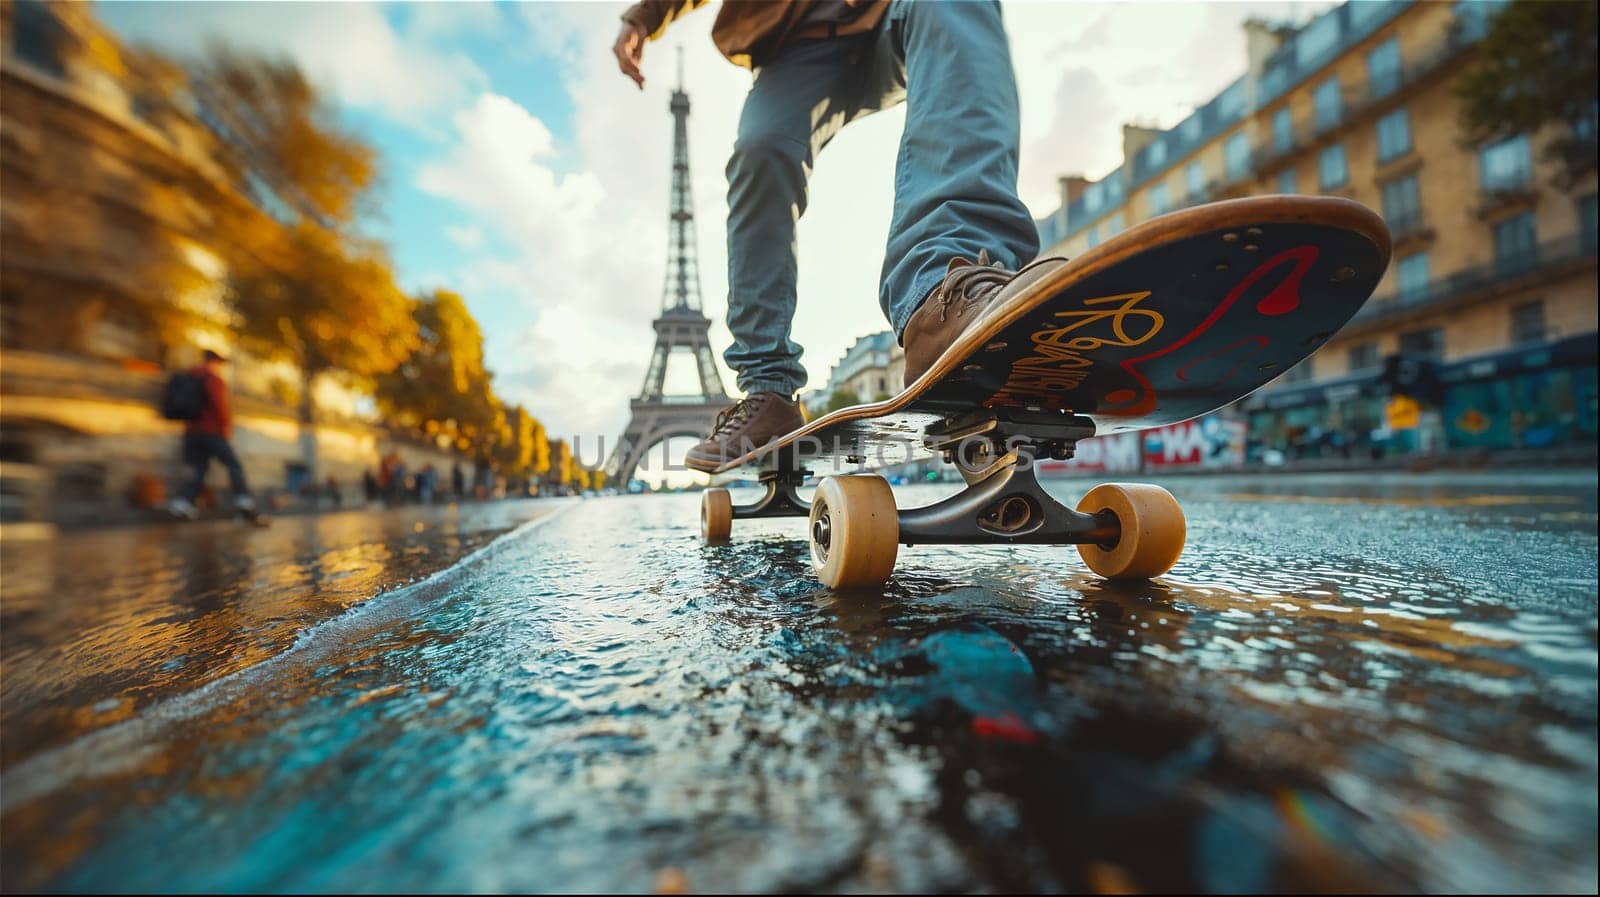 A skateboarder executes a stylish trick with the Eiffel Tower in the background. by evdakovka